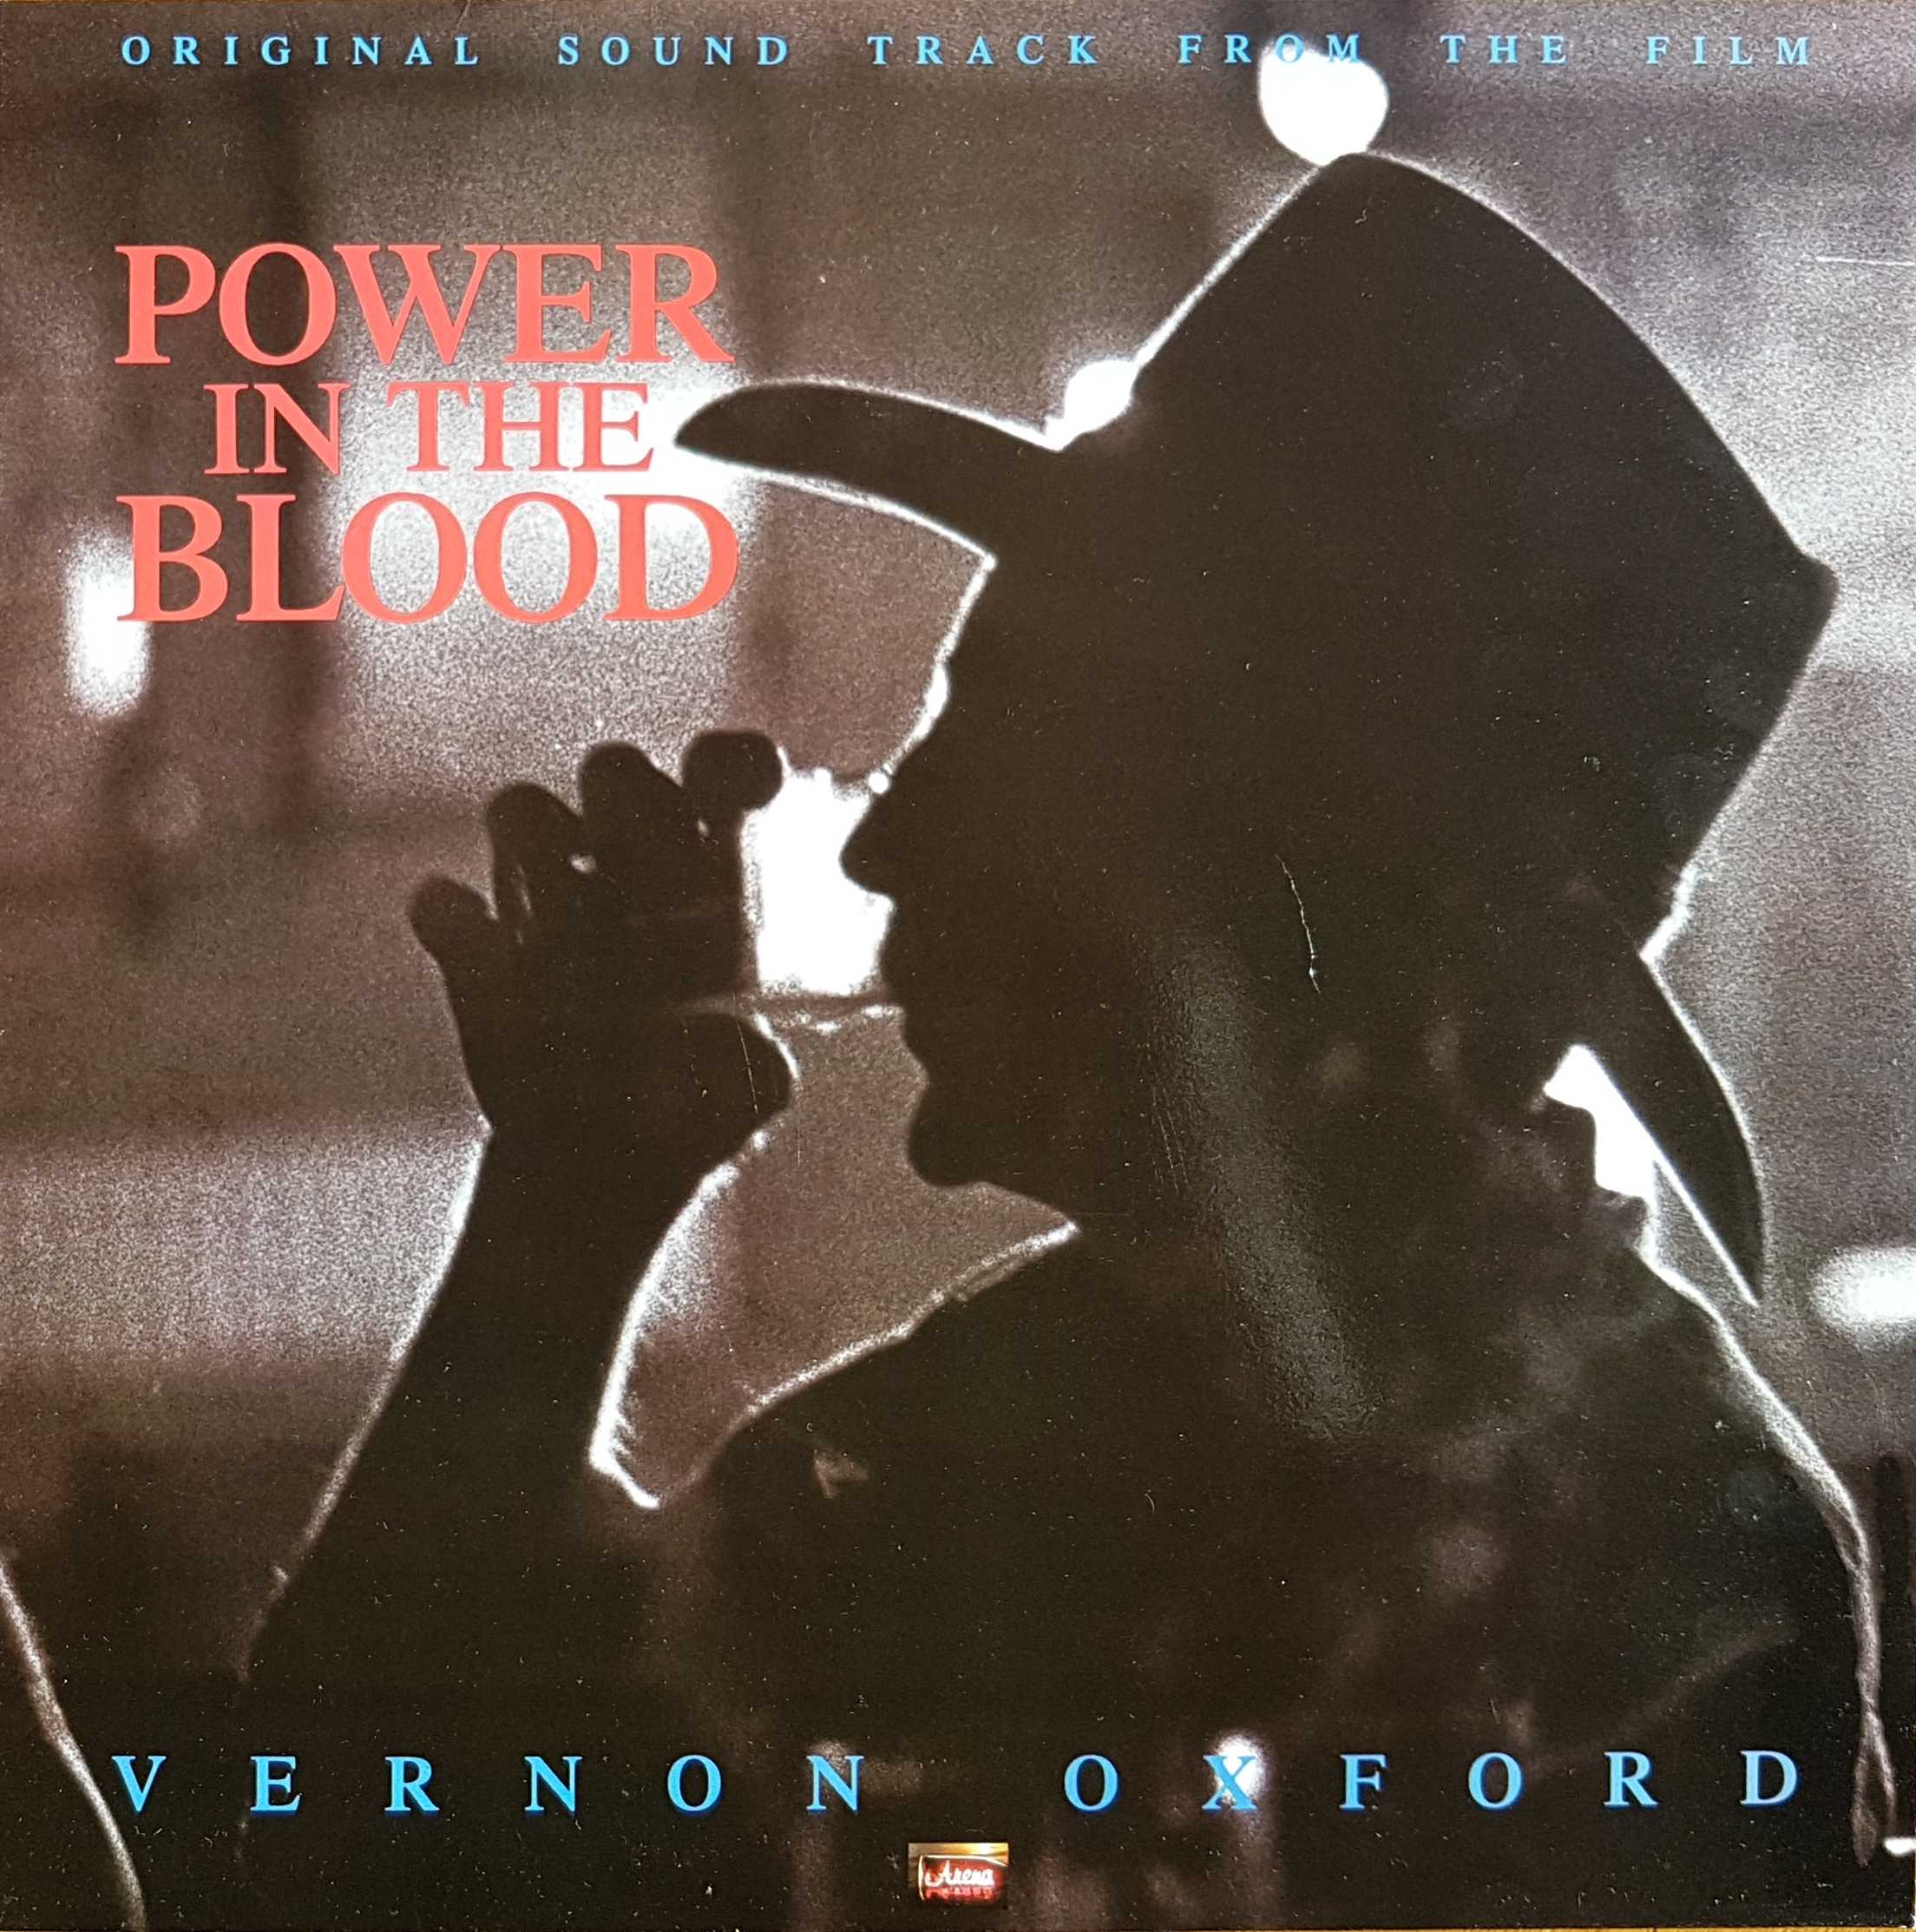 Picture of REN 729 Power in the blood by artist Vernon Oxford from the BBC albums - Records and Tapes library